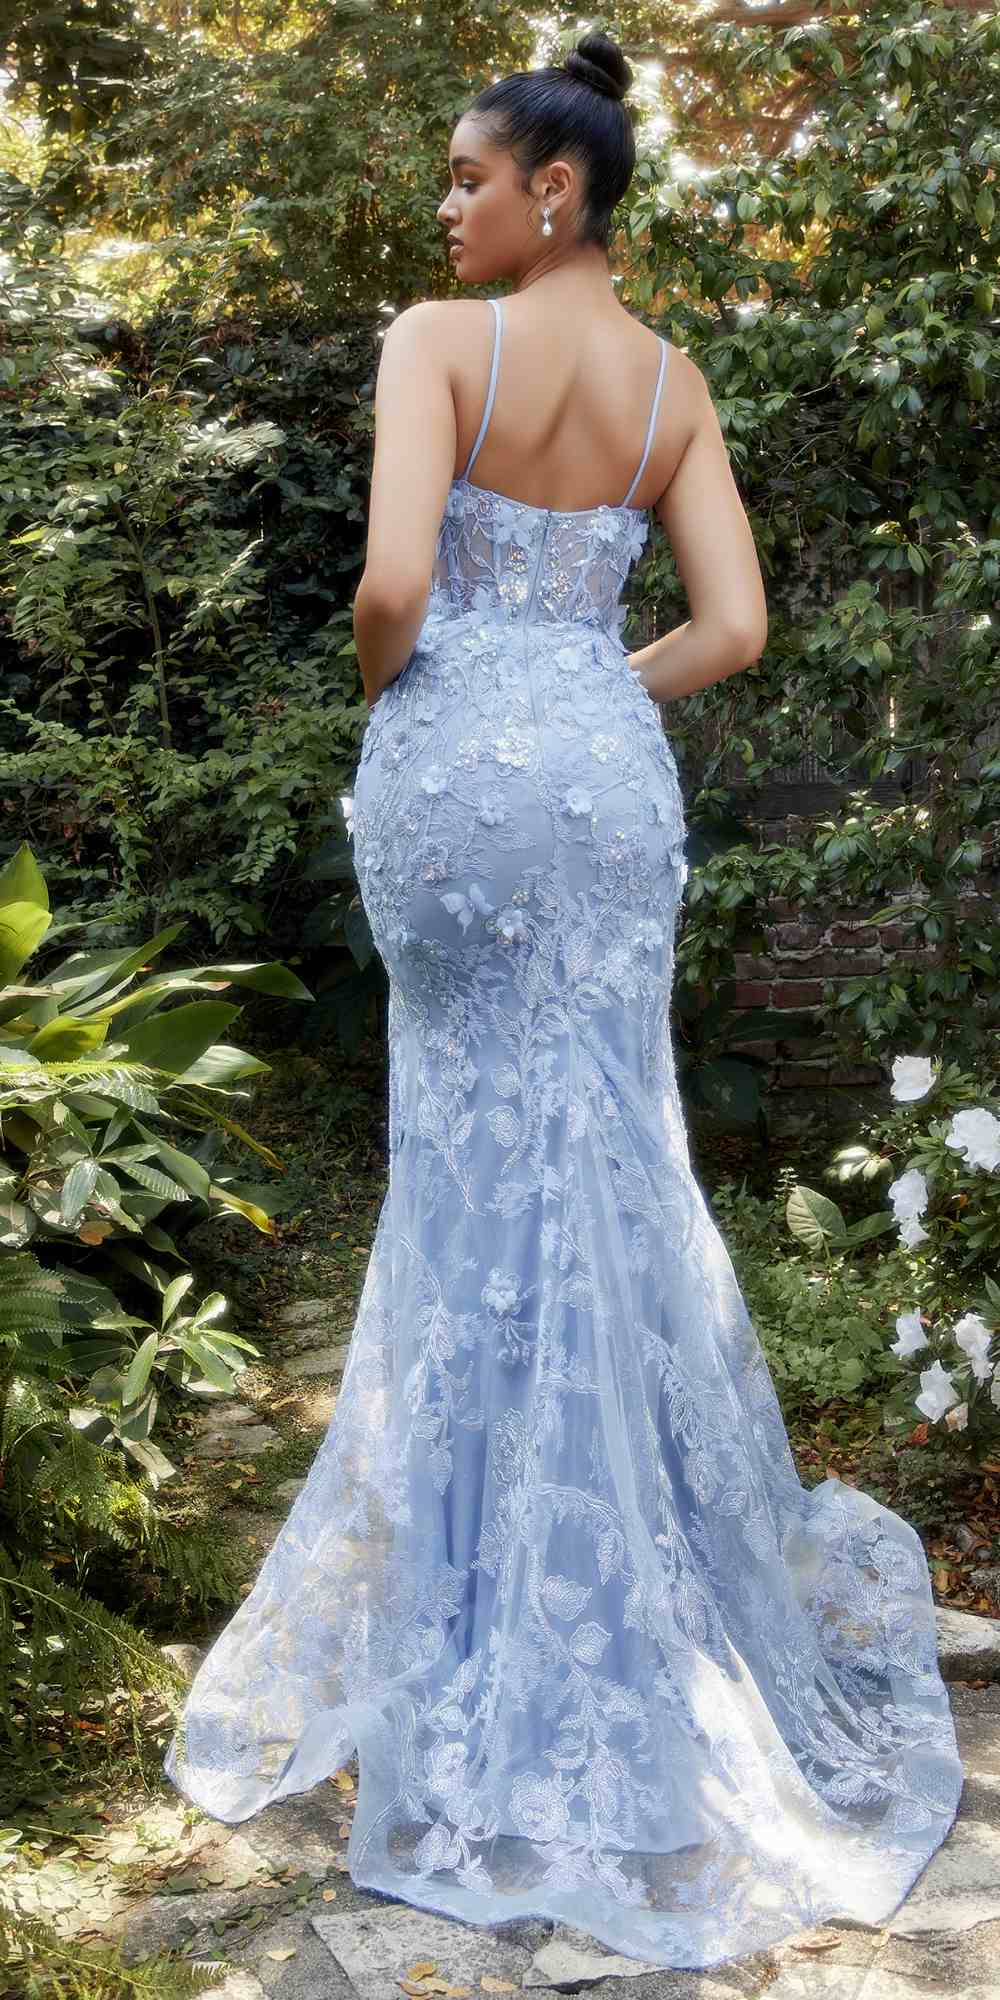 CRYSTAL STUDDED LACE MERMAID GOWN- A1211*